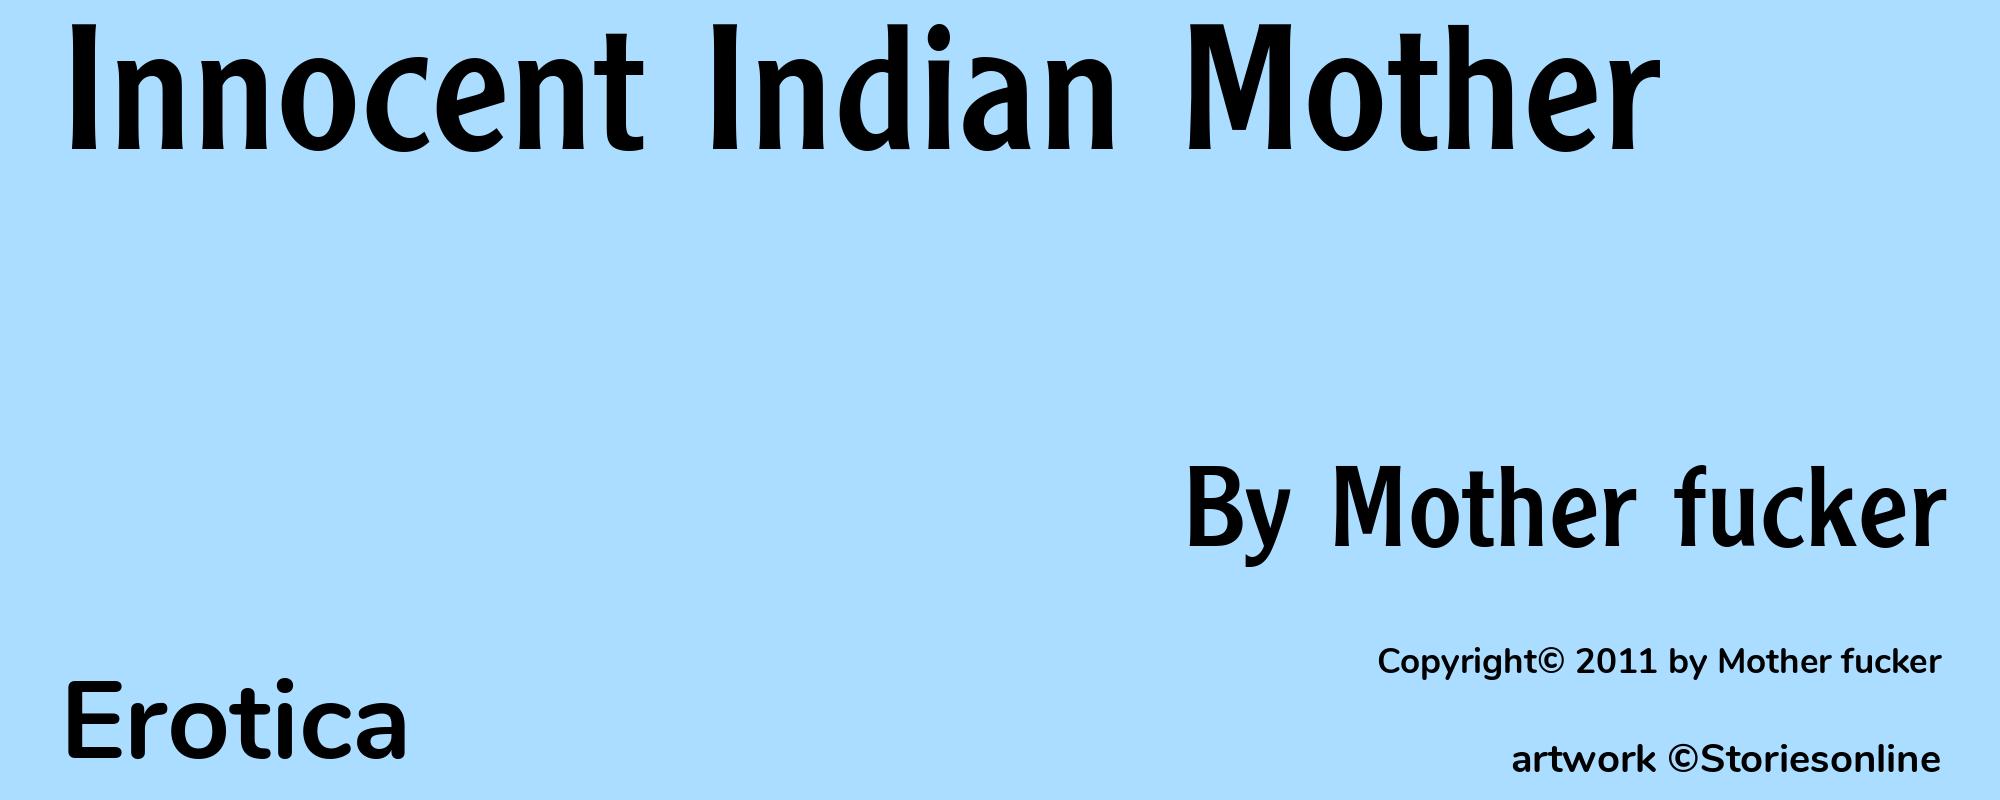 Innocent Indian Mother - Cover